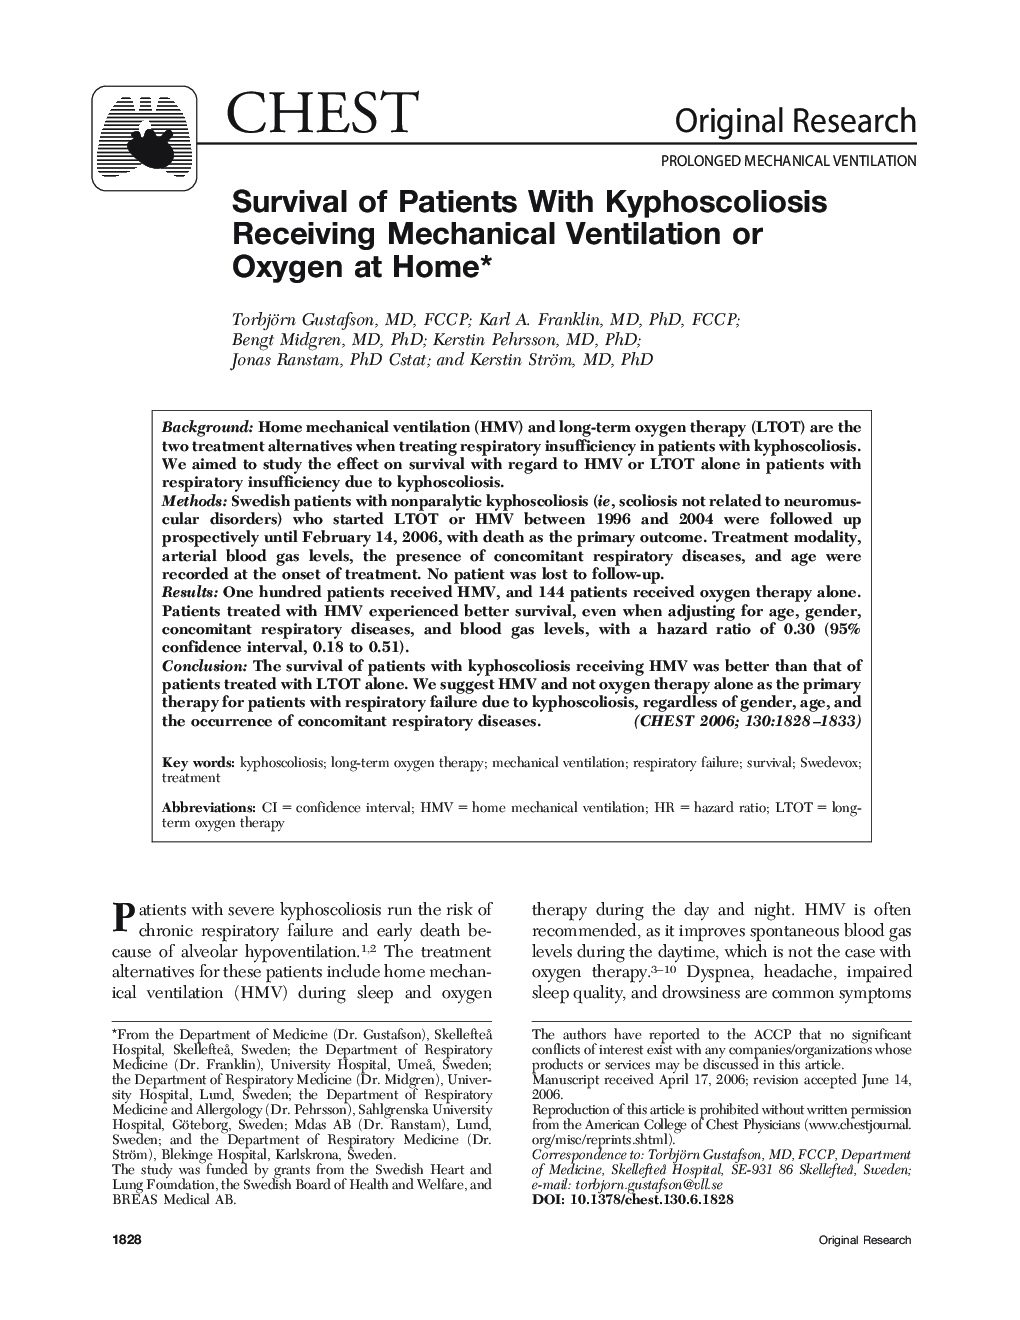 Survival of Patients With Kyphoscoliosis Receiving Mechanical Ventilation or Oxygen at Home 